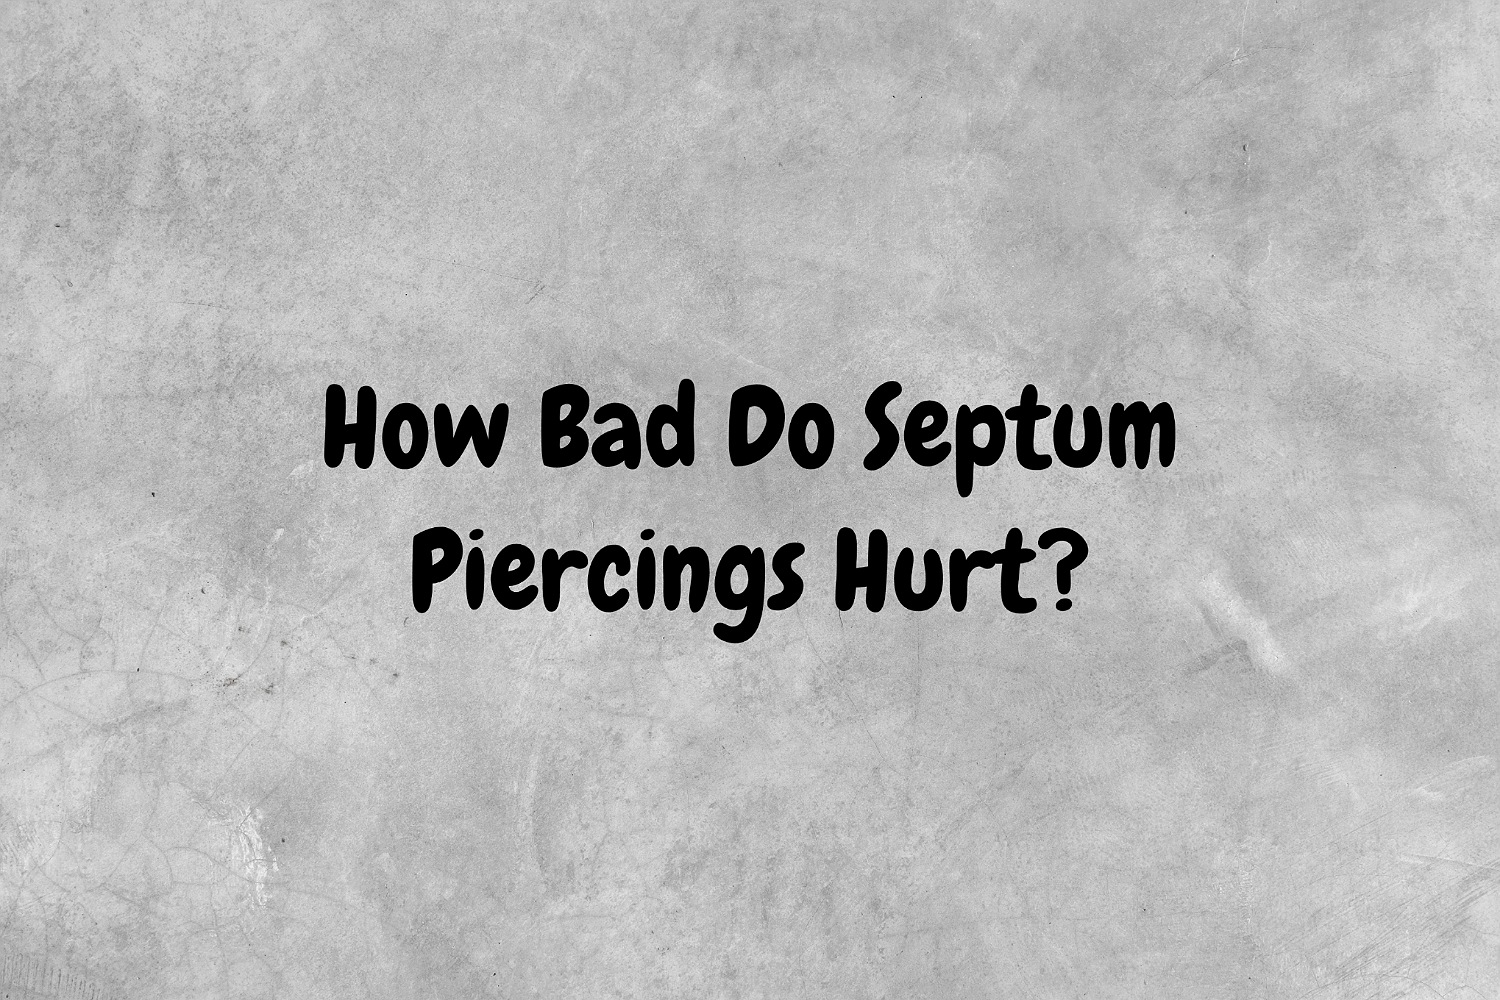 An image with a gray background and black text proposing the question, "How bad do septum piercings hurt?"